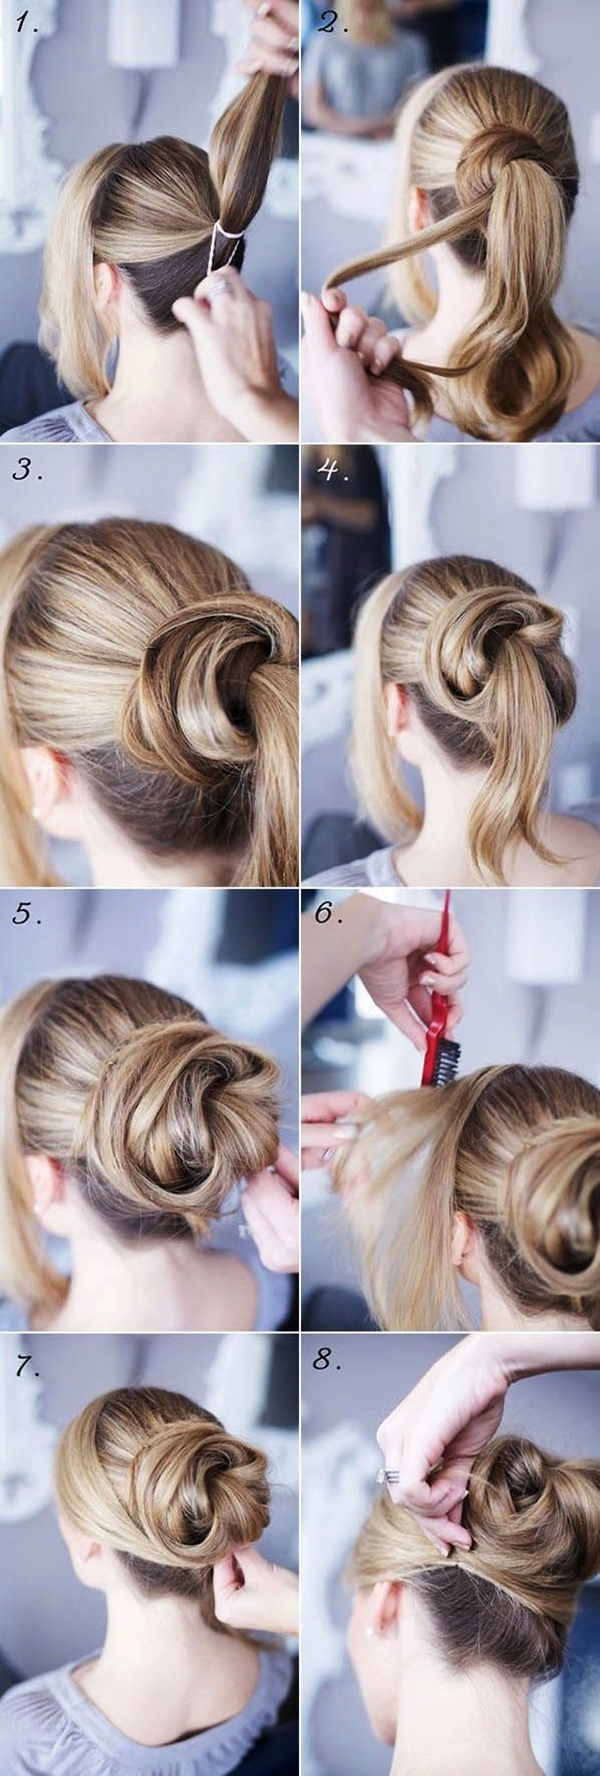 Easy Step By Step Hairstyles for Long Hair5